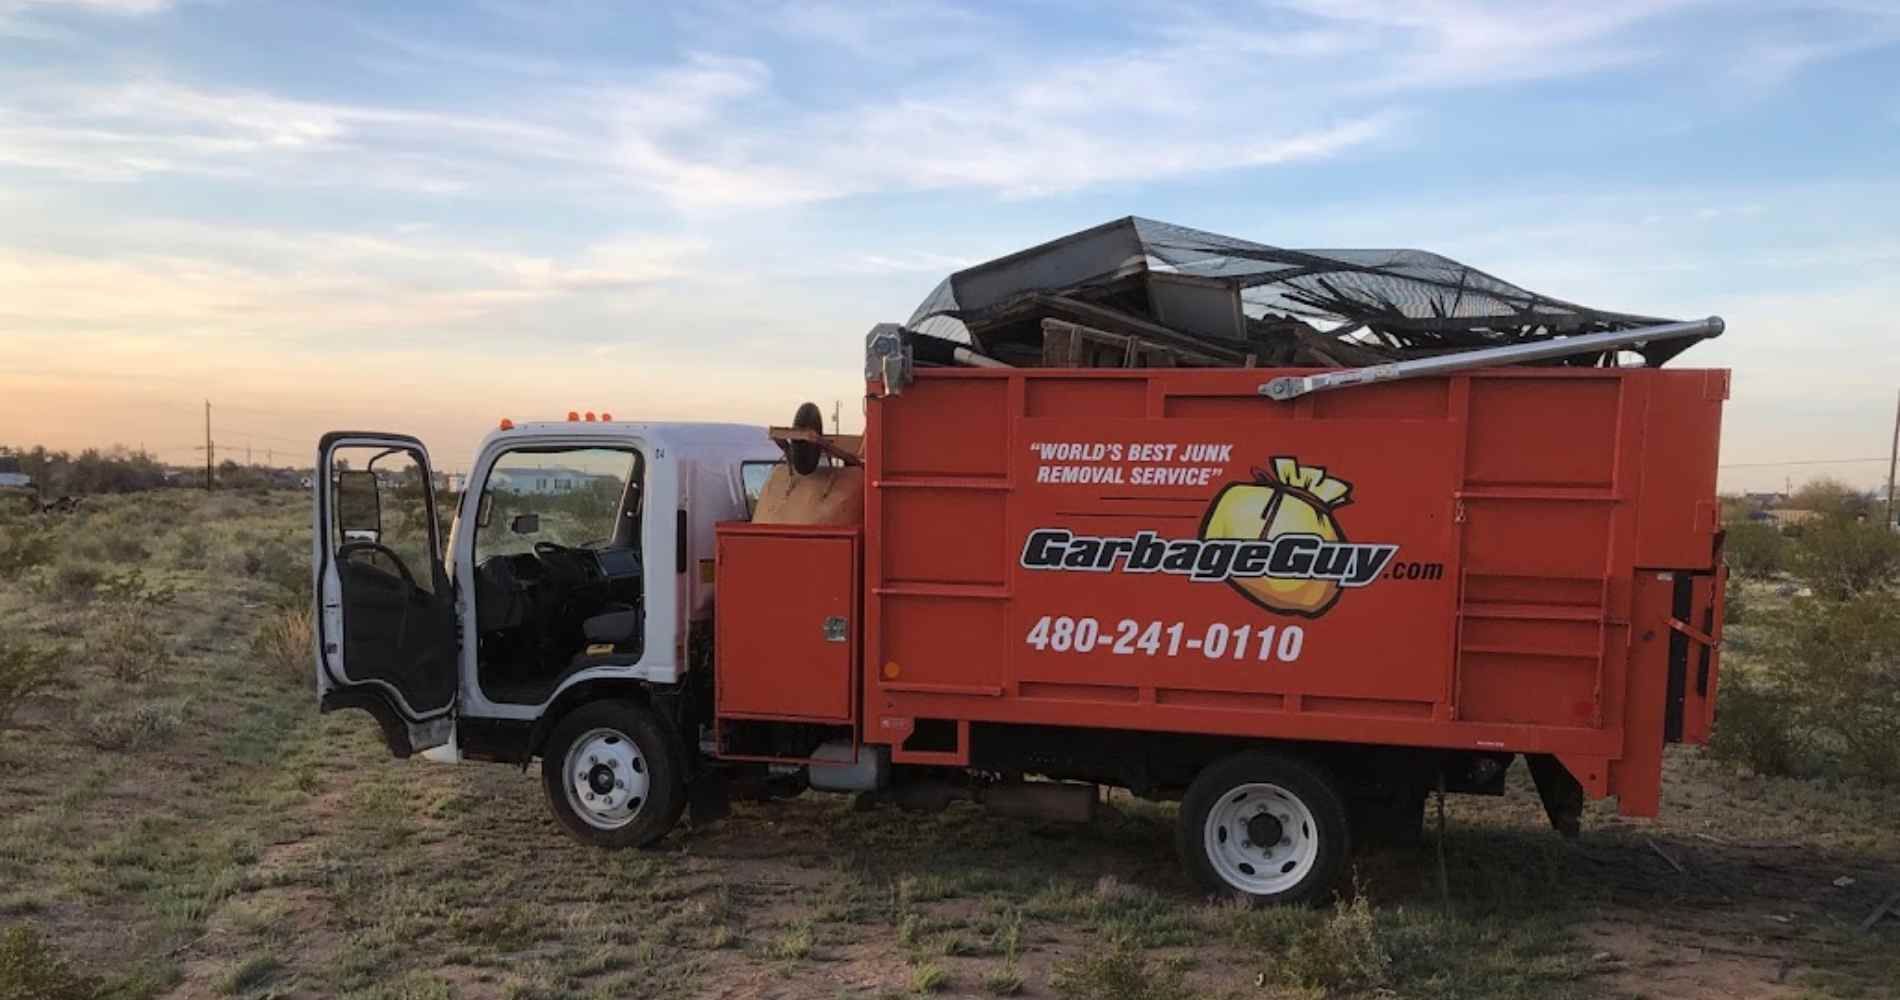 #1 for Junk Removal in Chandler, AZ with Over 1200 5-Star Reviews!